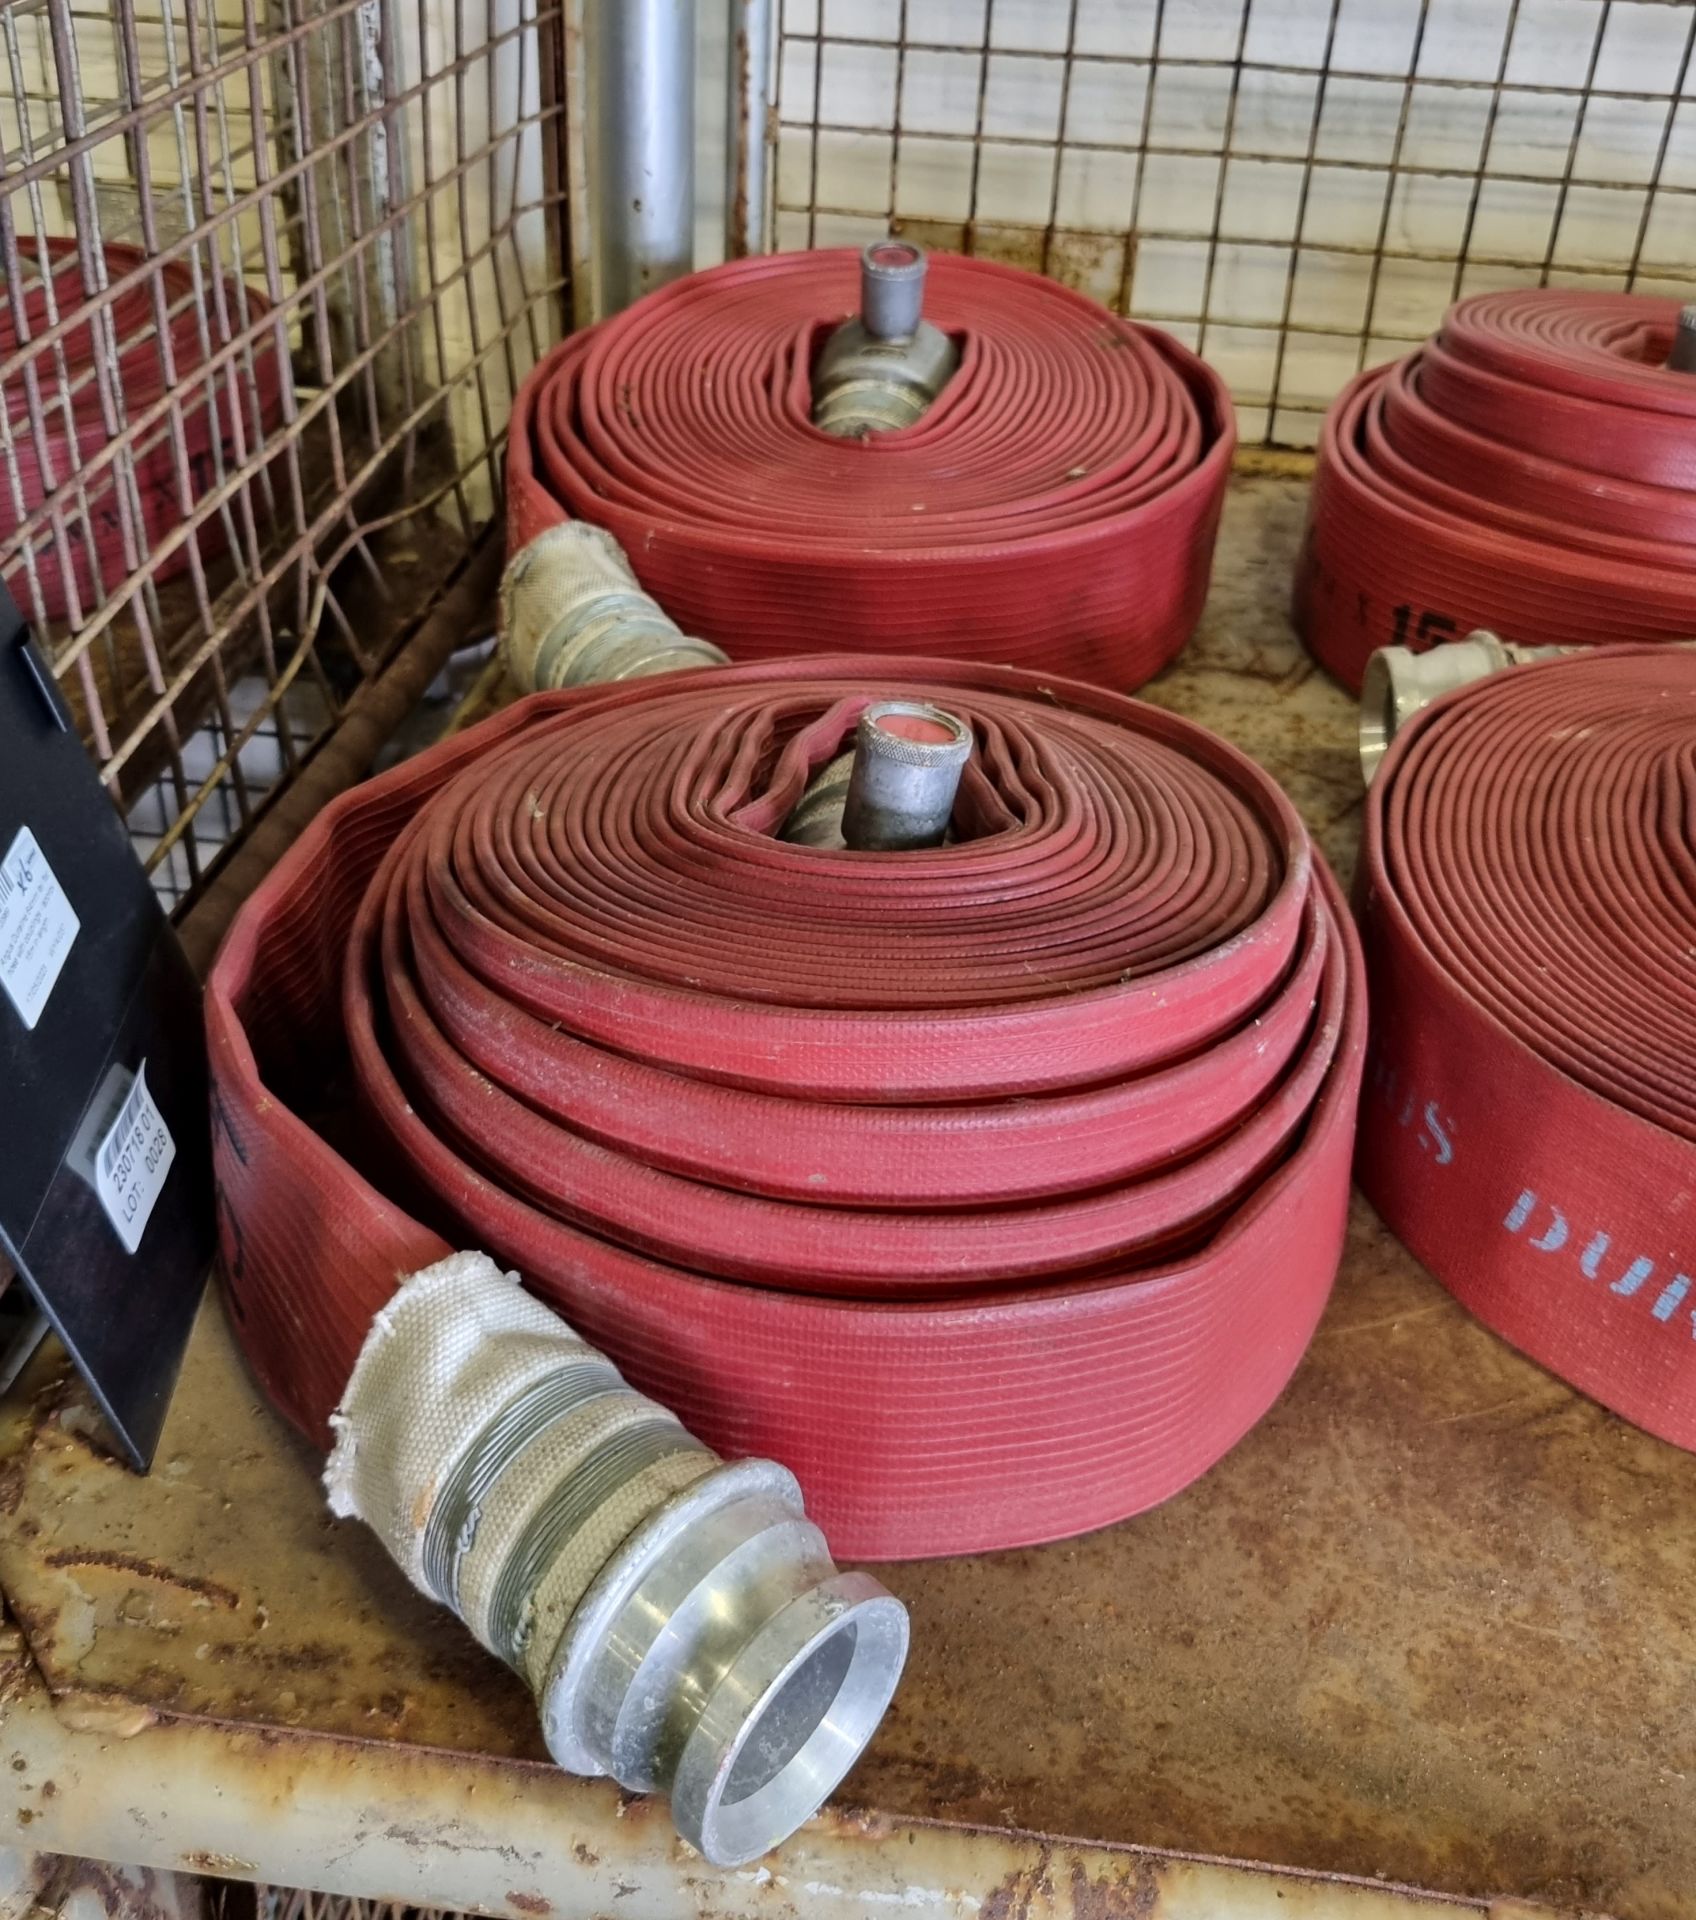 6x Angus Duraline 64mm lay flat hoses with couplings - approx 15m in length - Bild 5 aus 5